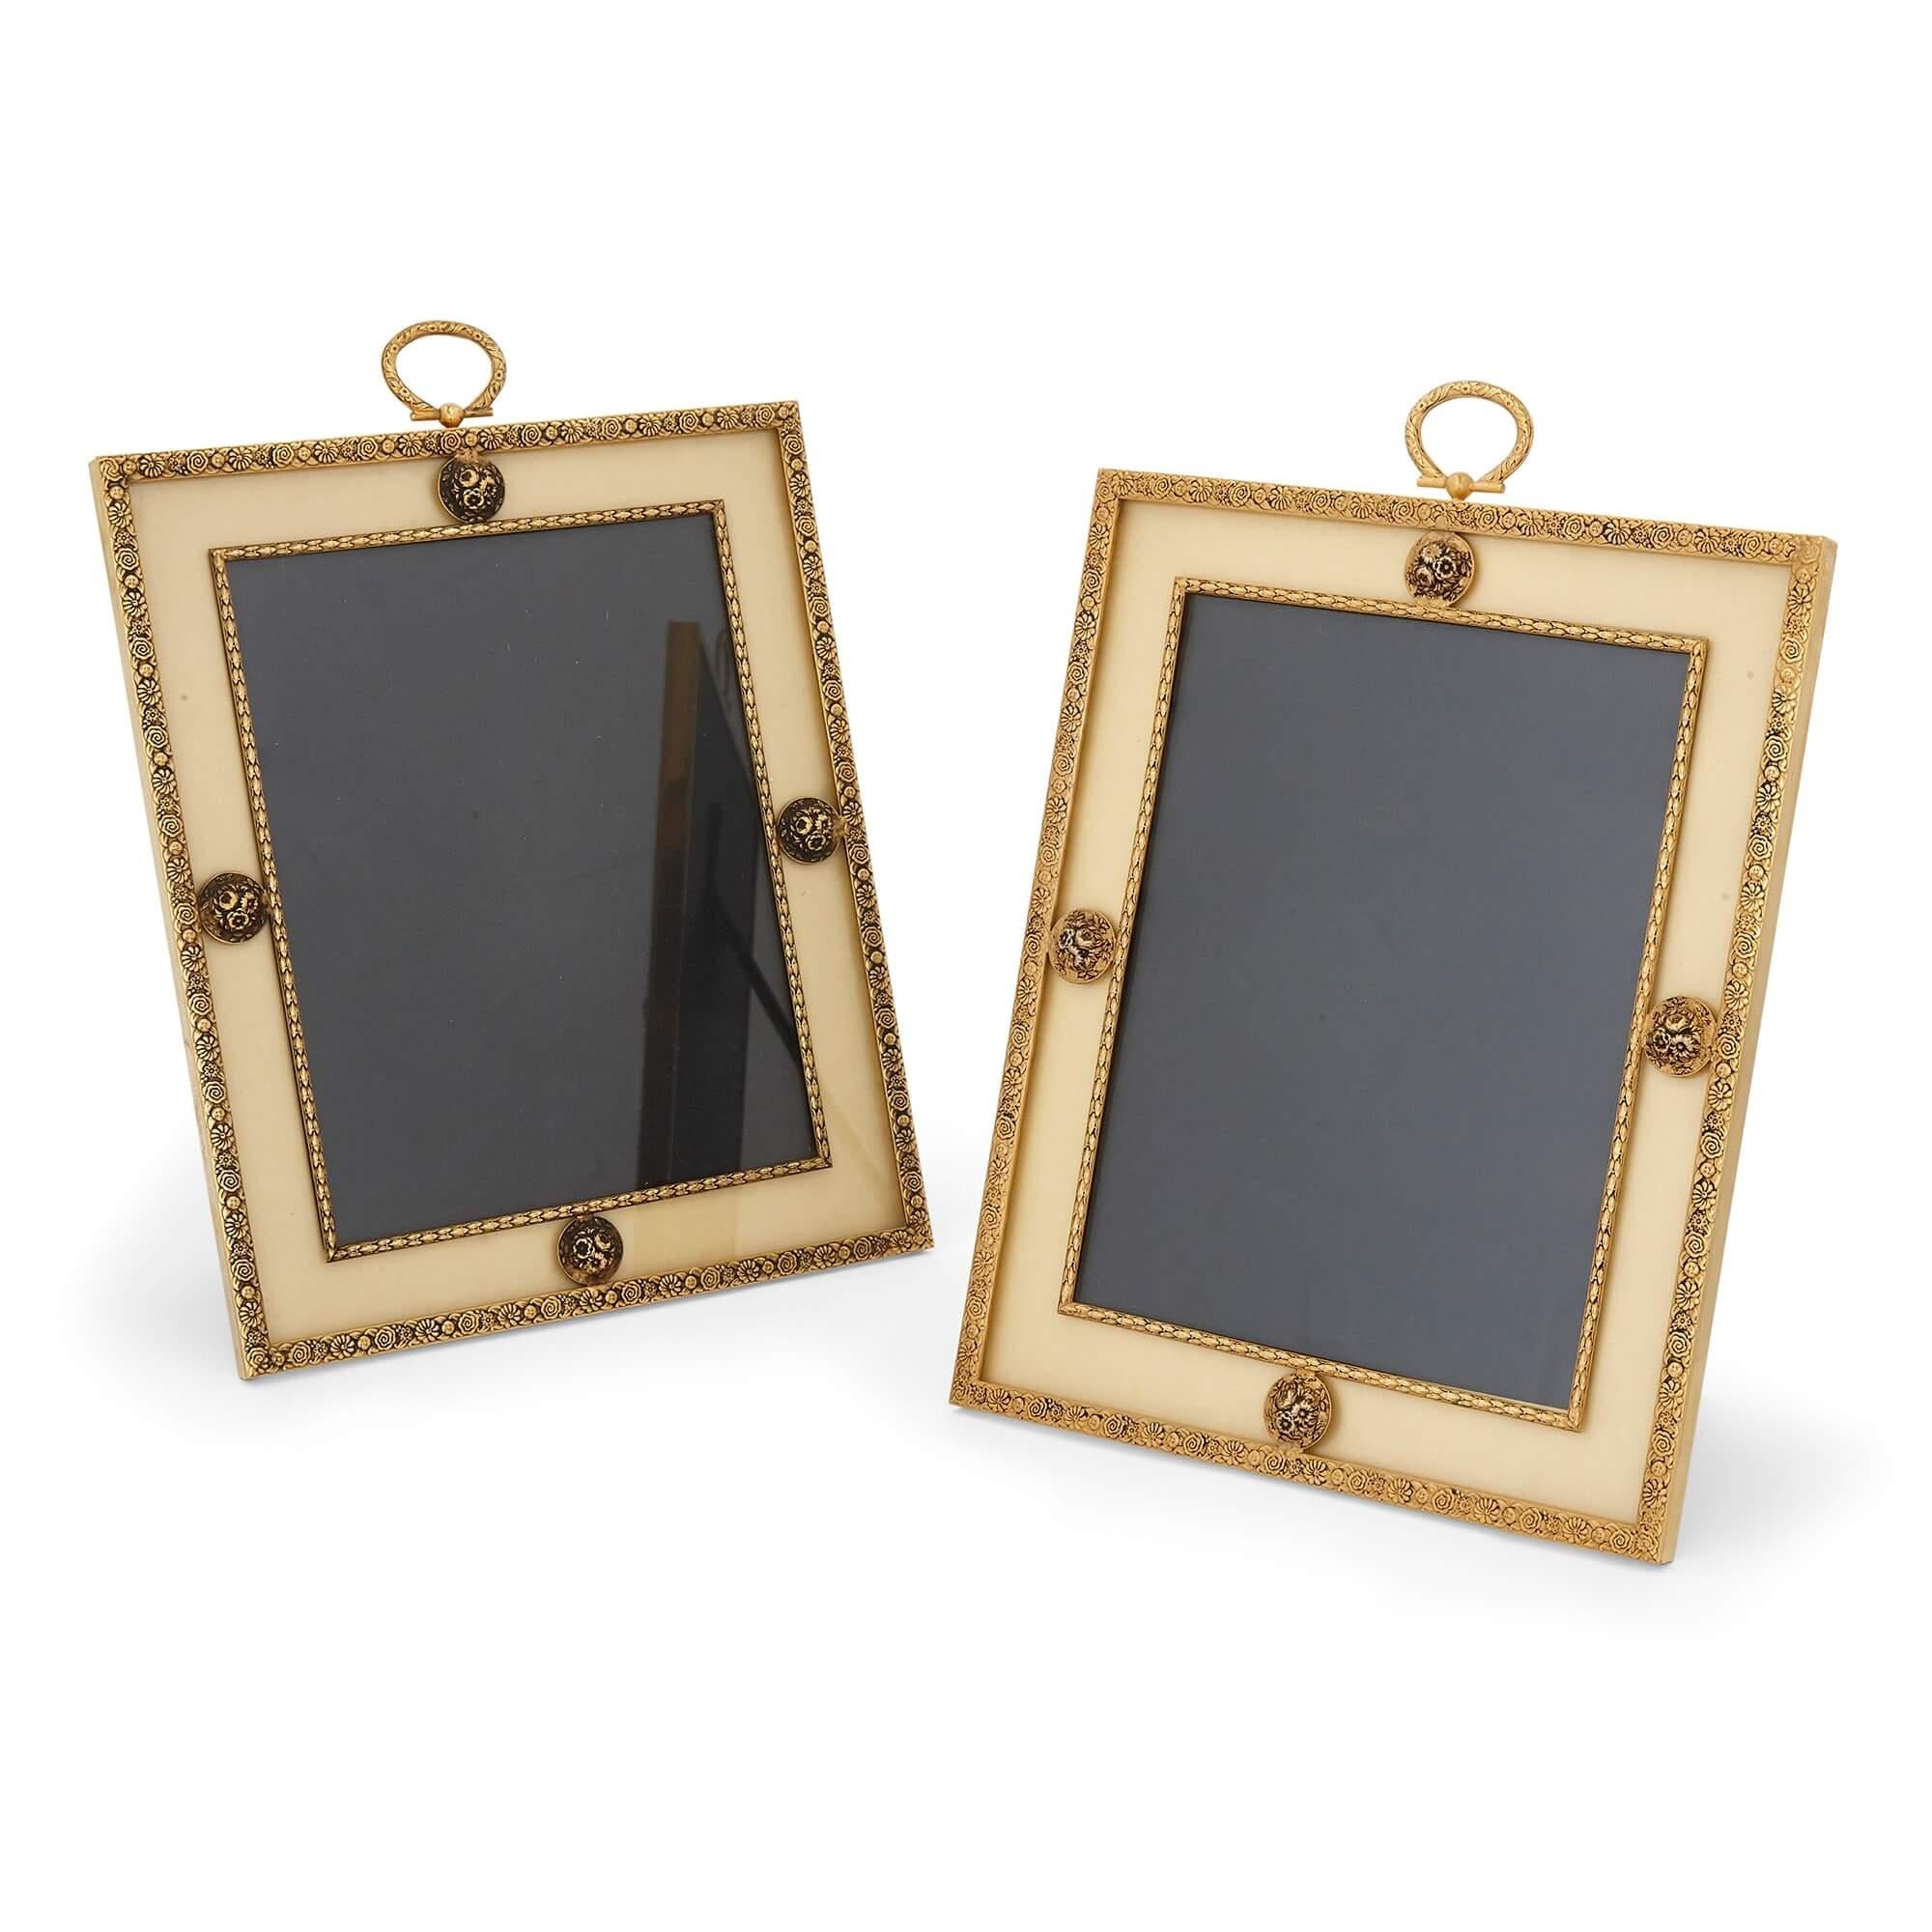 Pair of silk mounted gilt metal picture frames by Puiforcat of France
French, 20th Century
Measures: Height 34cm, width 25cm, depth 2cm, depth when open 23cm

The picture frames in this pair are designed in the Neoclassical style. Each frame is